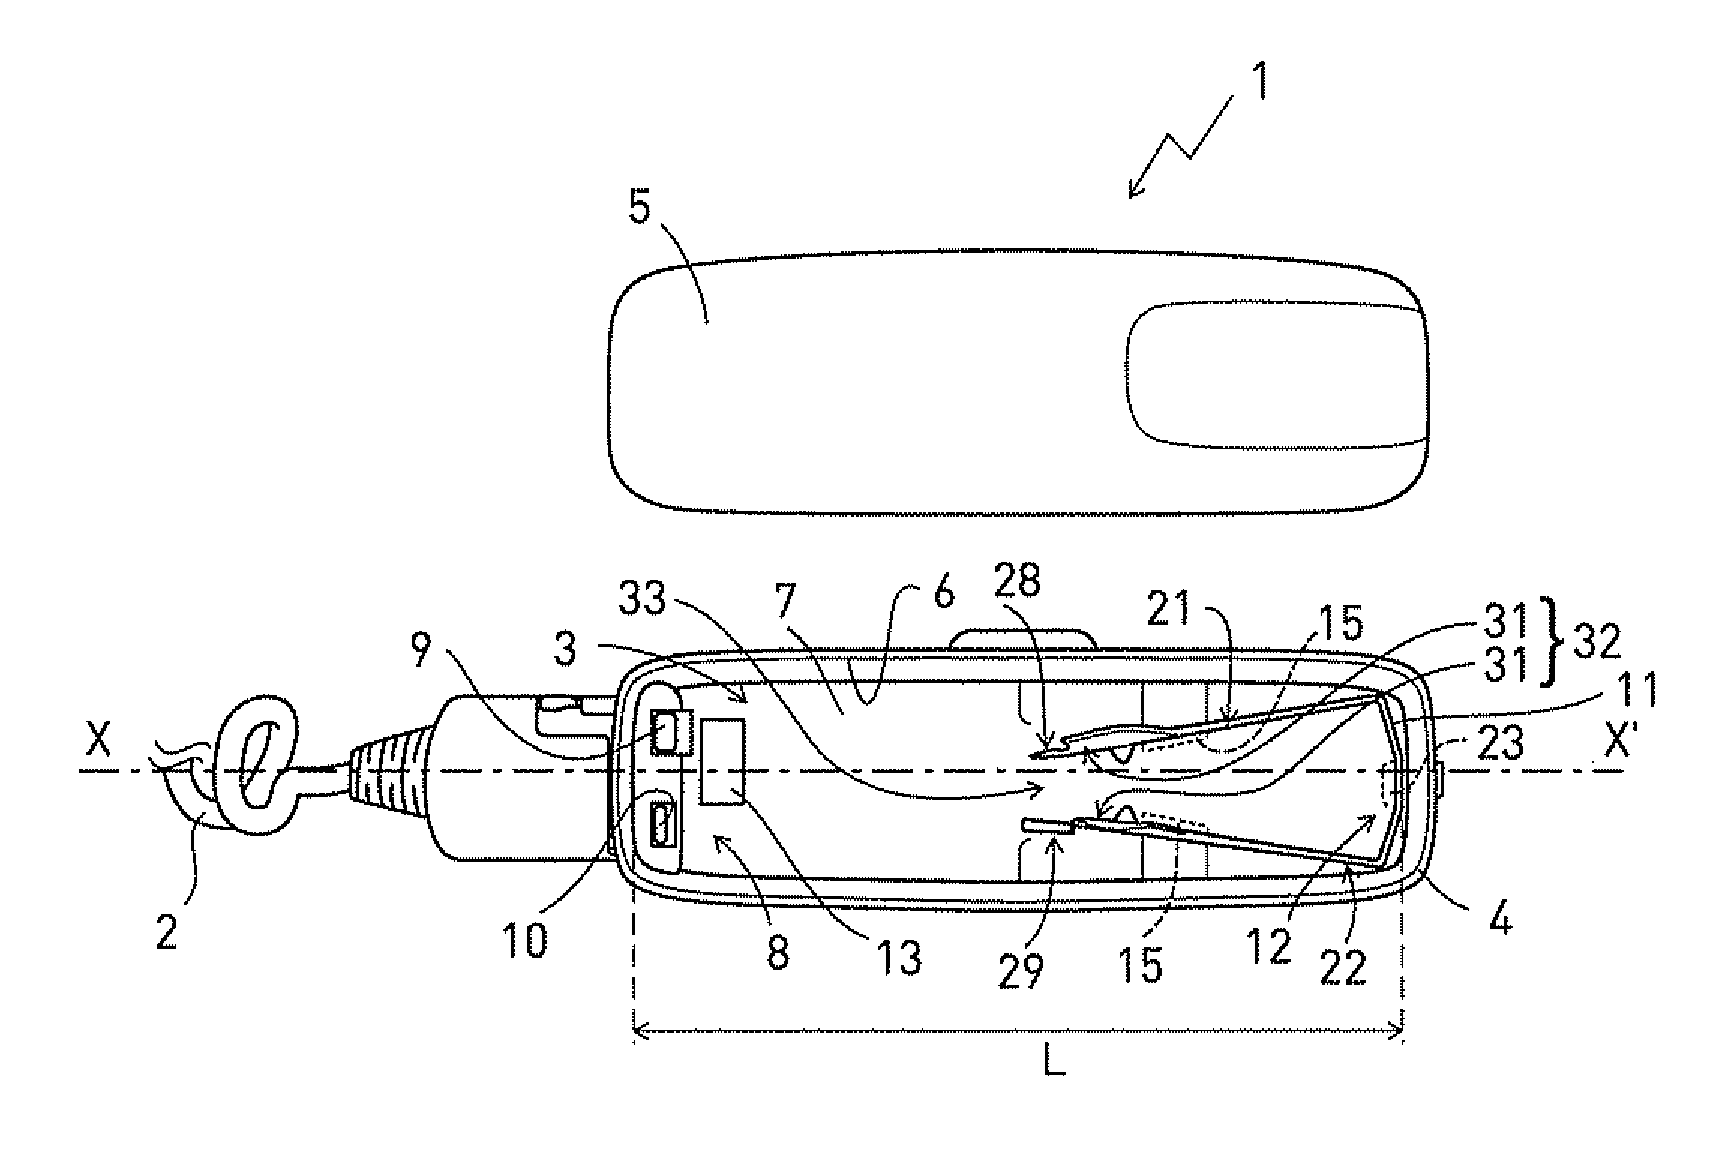 Device for electric power supply of a portable lamp